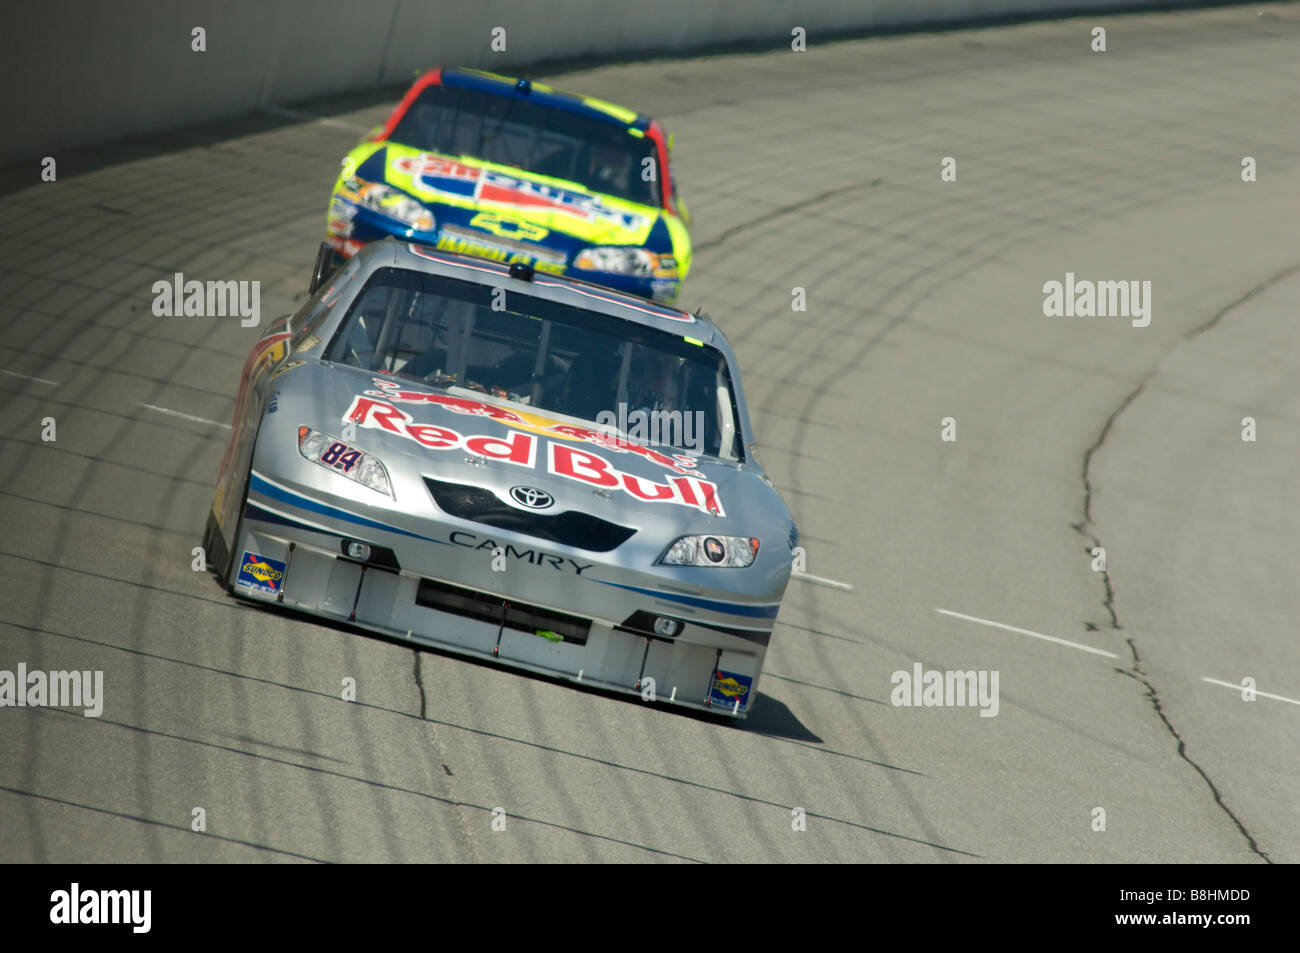 AJ Allmendinger drives the Red Bull Toyota Camry at the LifeLock 400 at Michigan International Speedway, 2008. Stock Photo